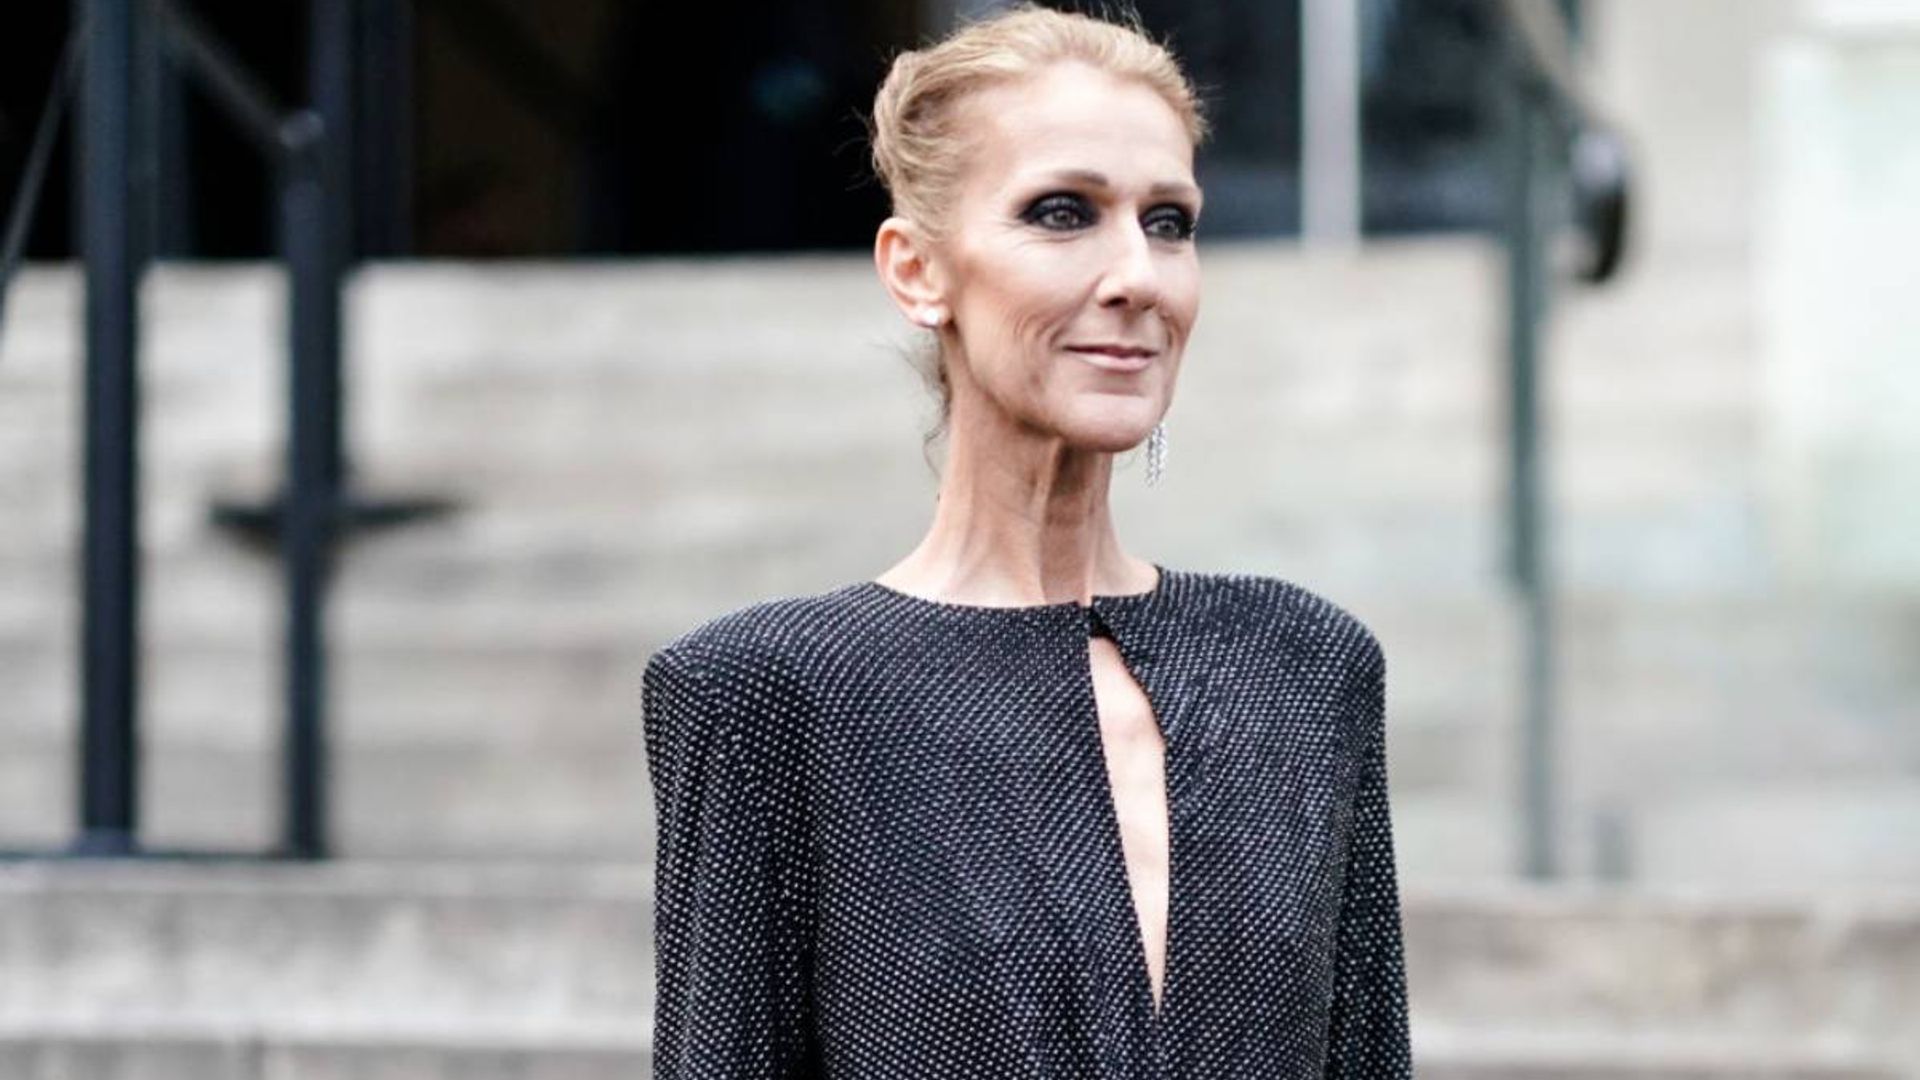 Celine Dion pleads with fans to 'be kind' as she shares important mental health message